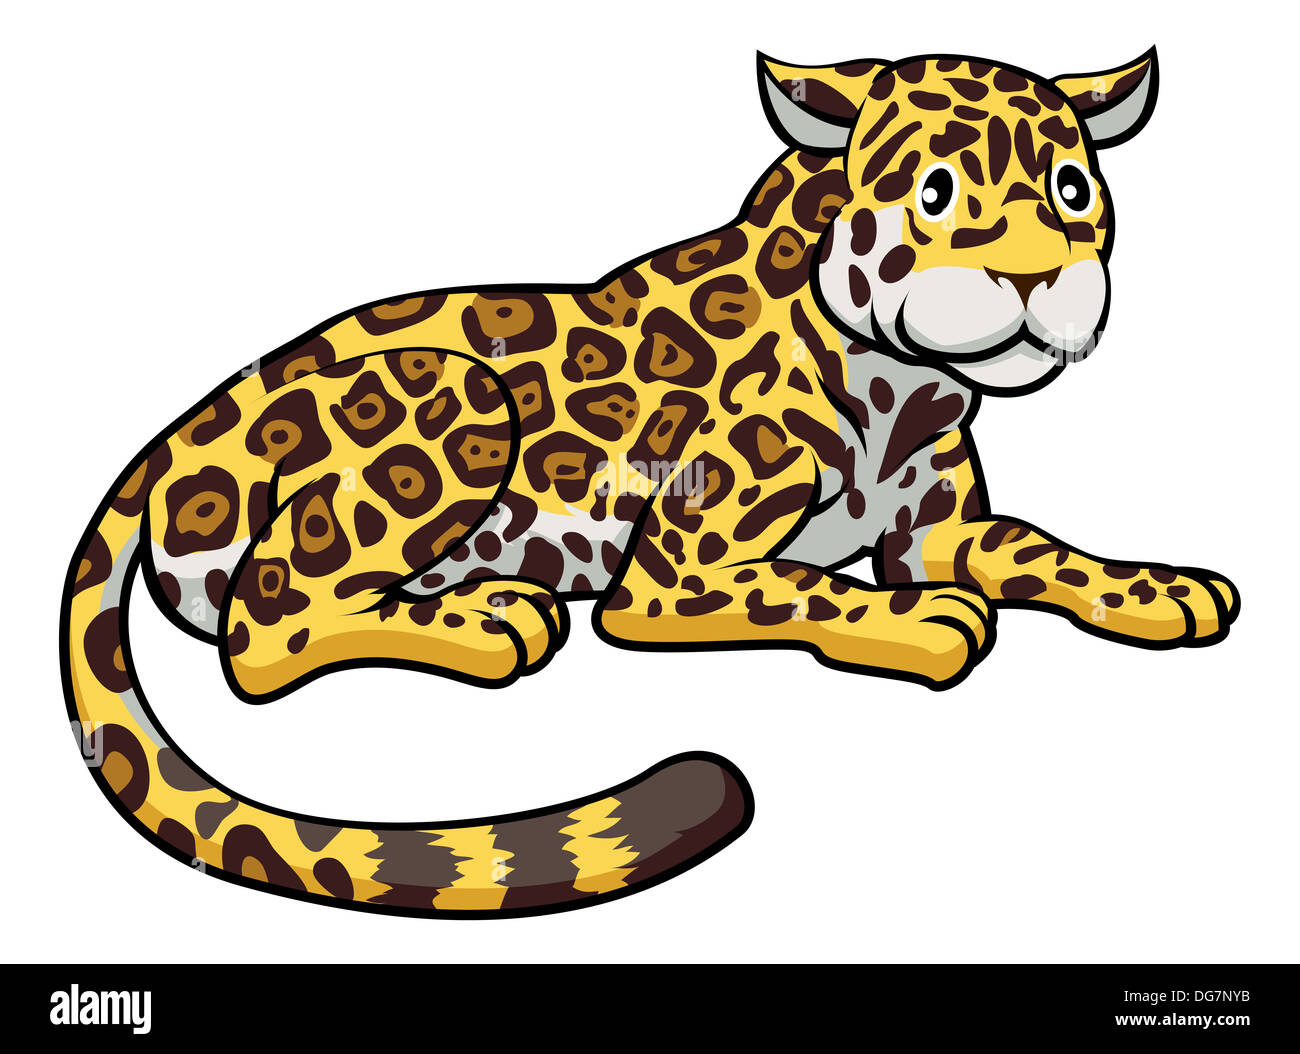 Cartoon Smiling Jaguar Cut Out Stock Images And Pictures Alamy